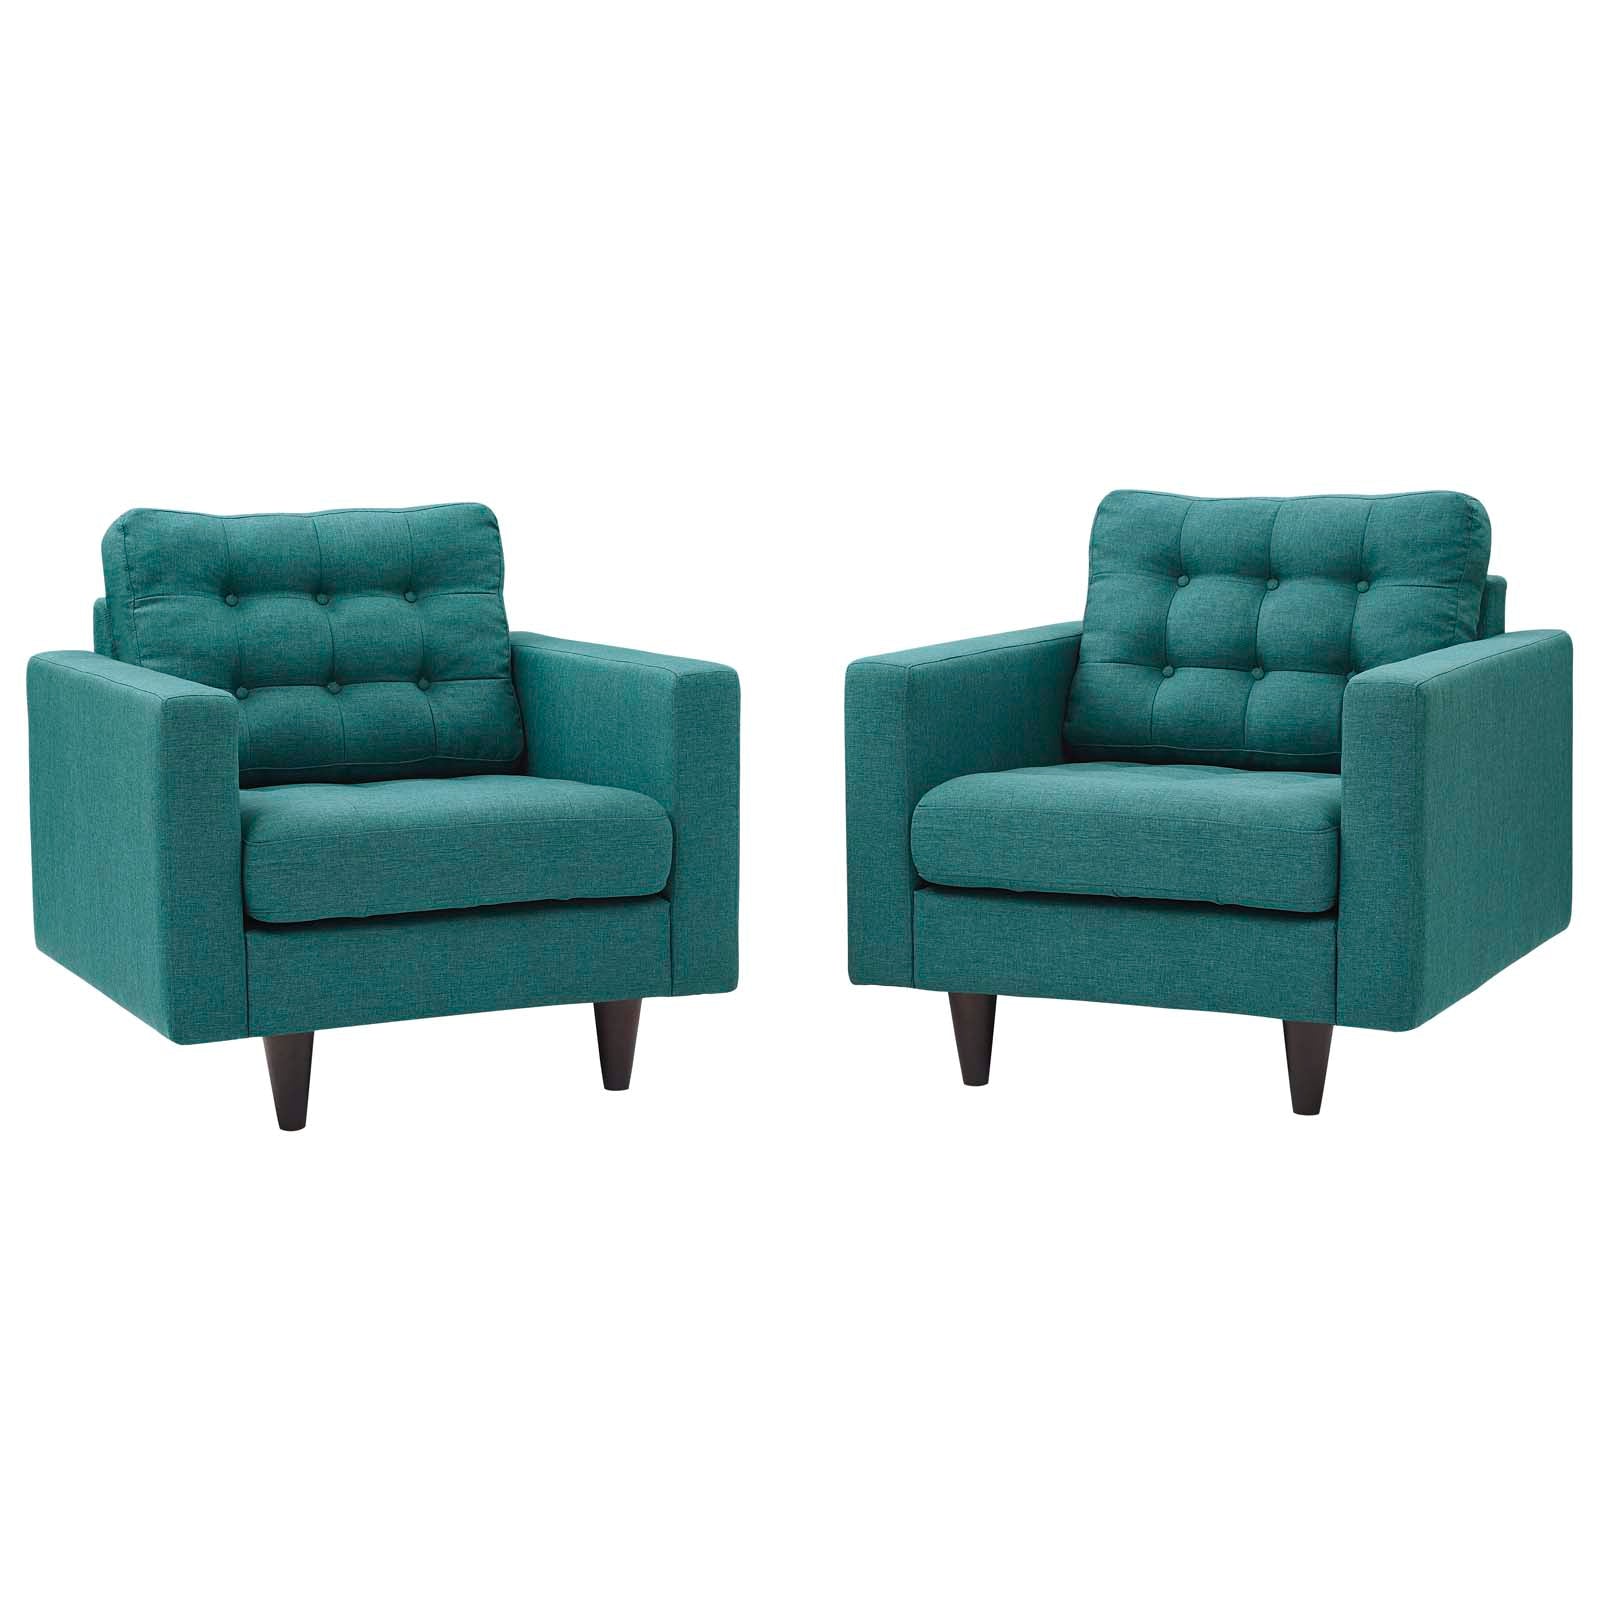 Modway Living Room Sets - Empress Armchair Upholstered Fabric Set of 2 Teal